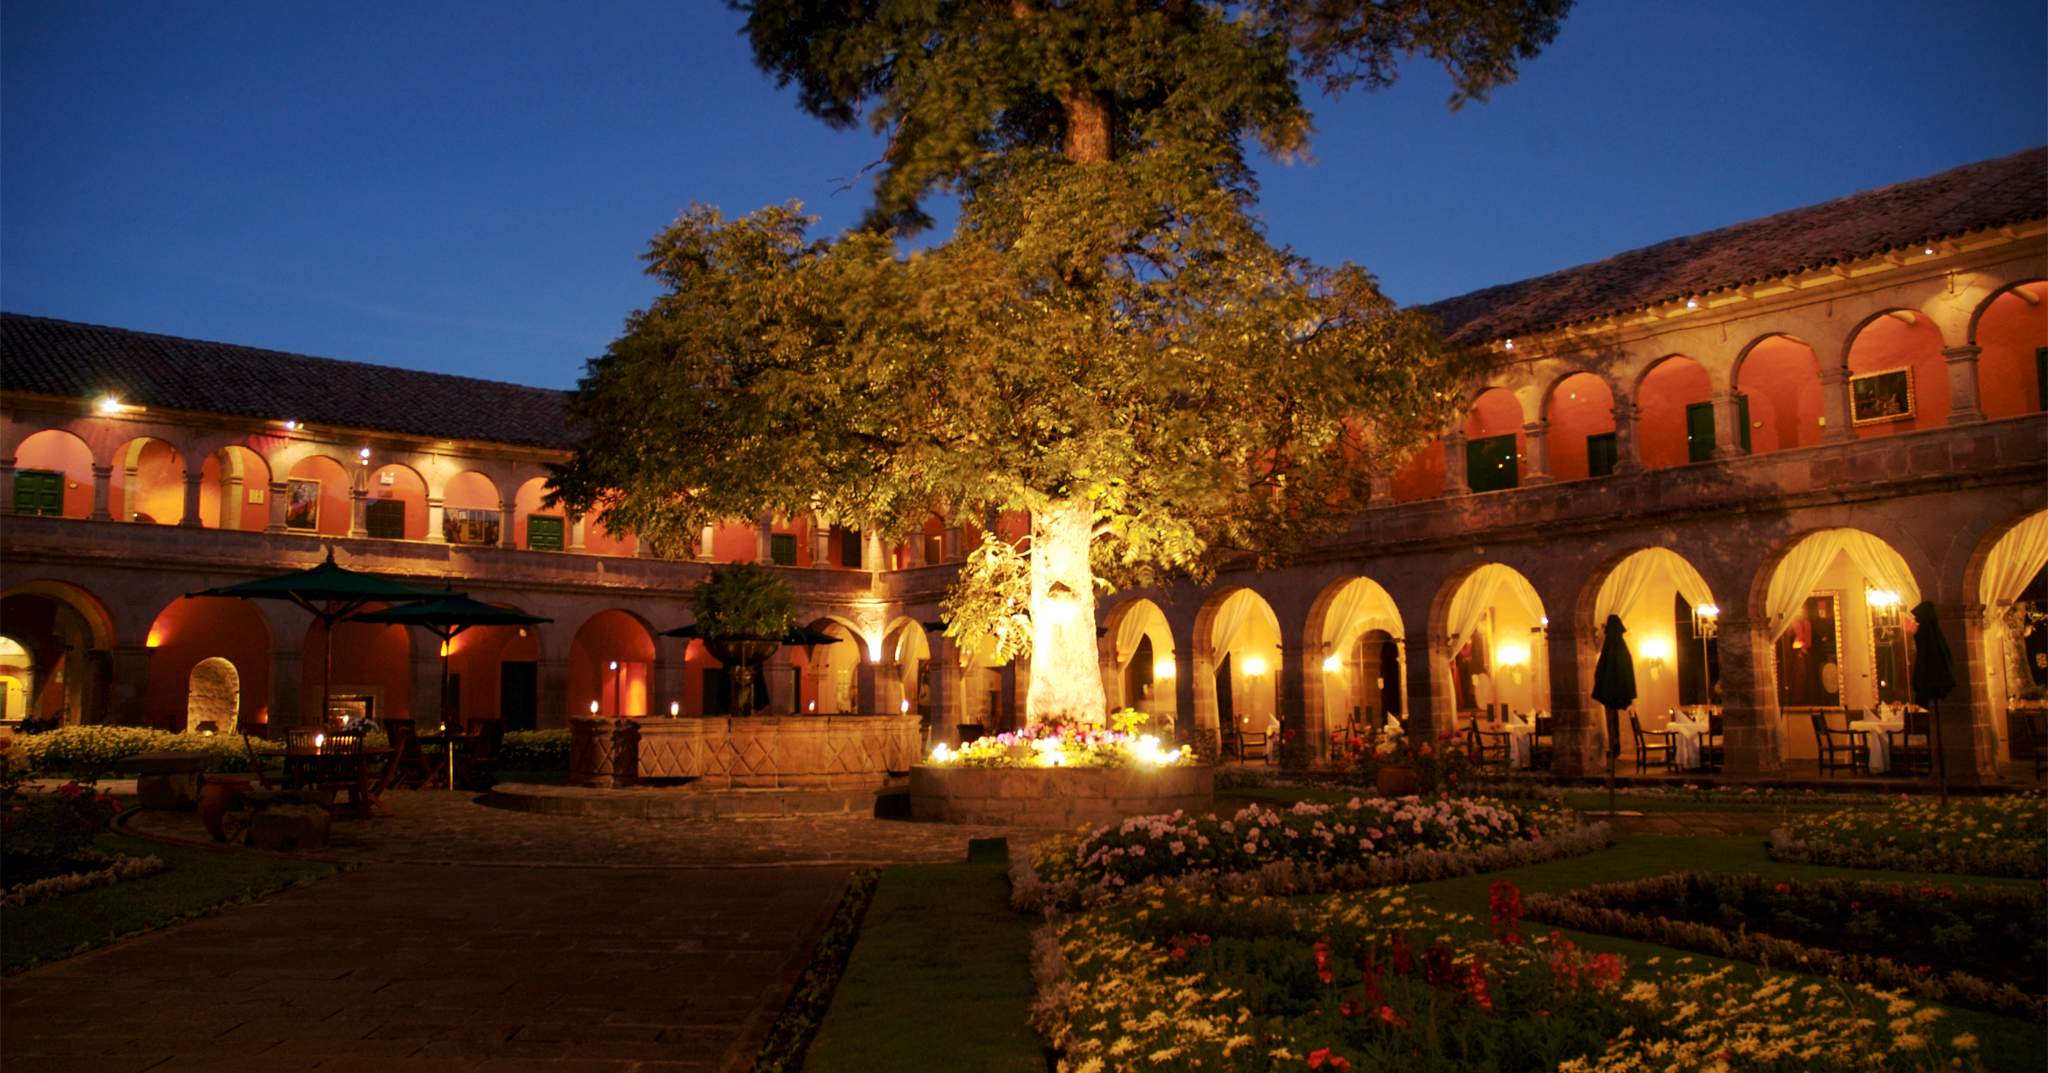 Monasterio, A Belmond Hotel, Cusco in Cusco: Find Hotel Reviews, Rooms, and  Prices on